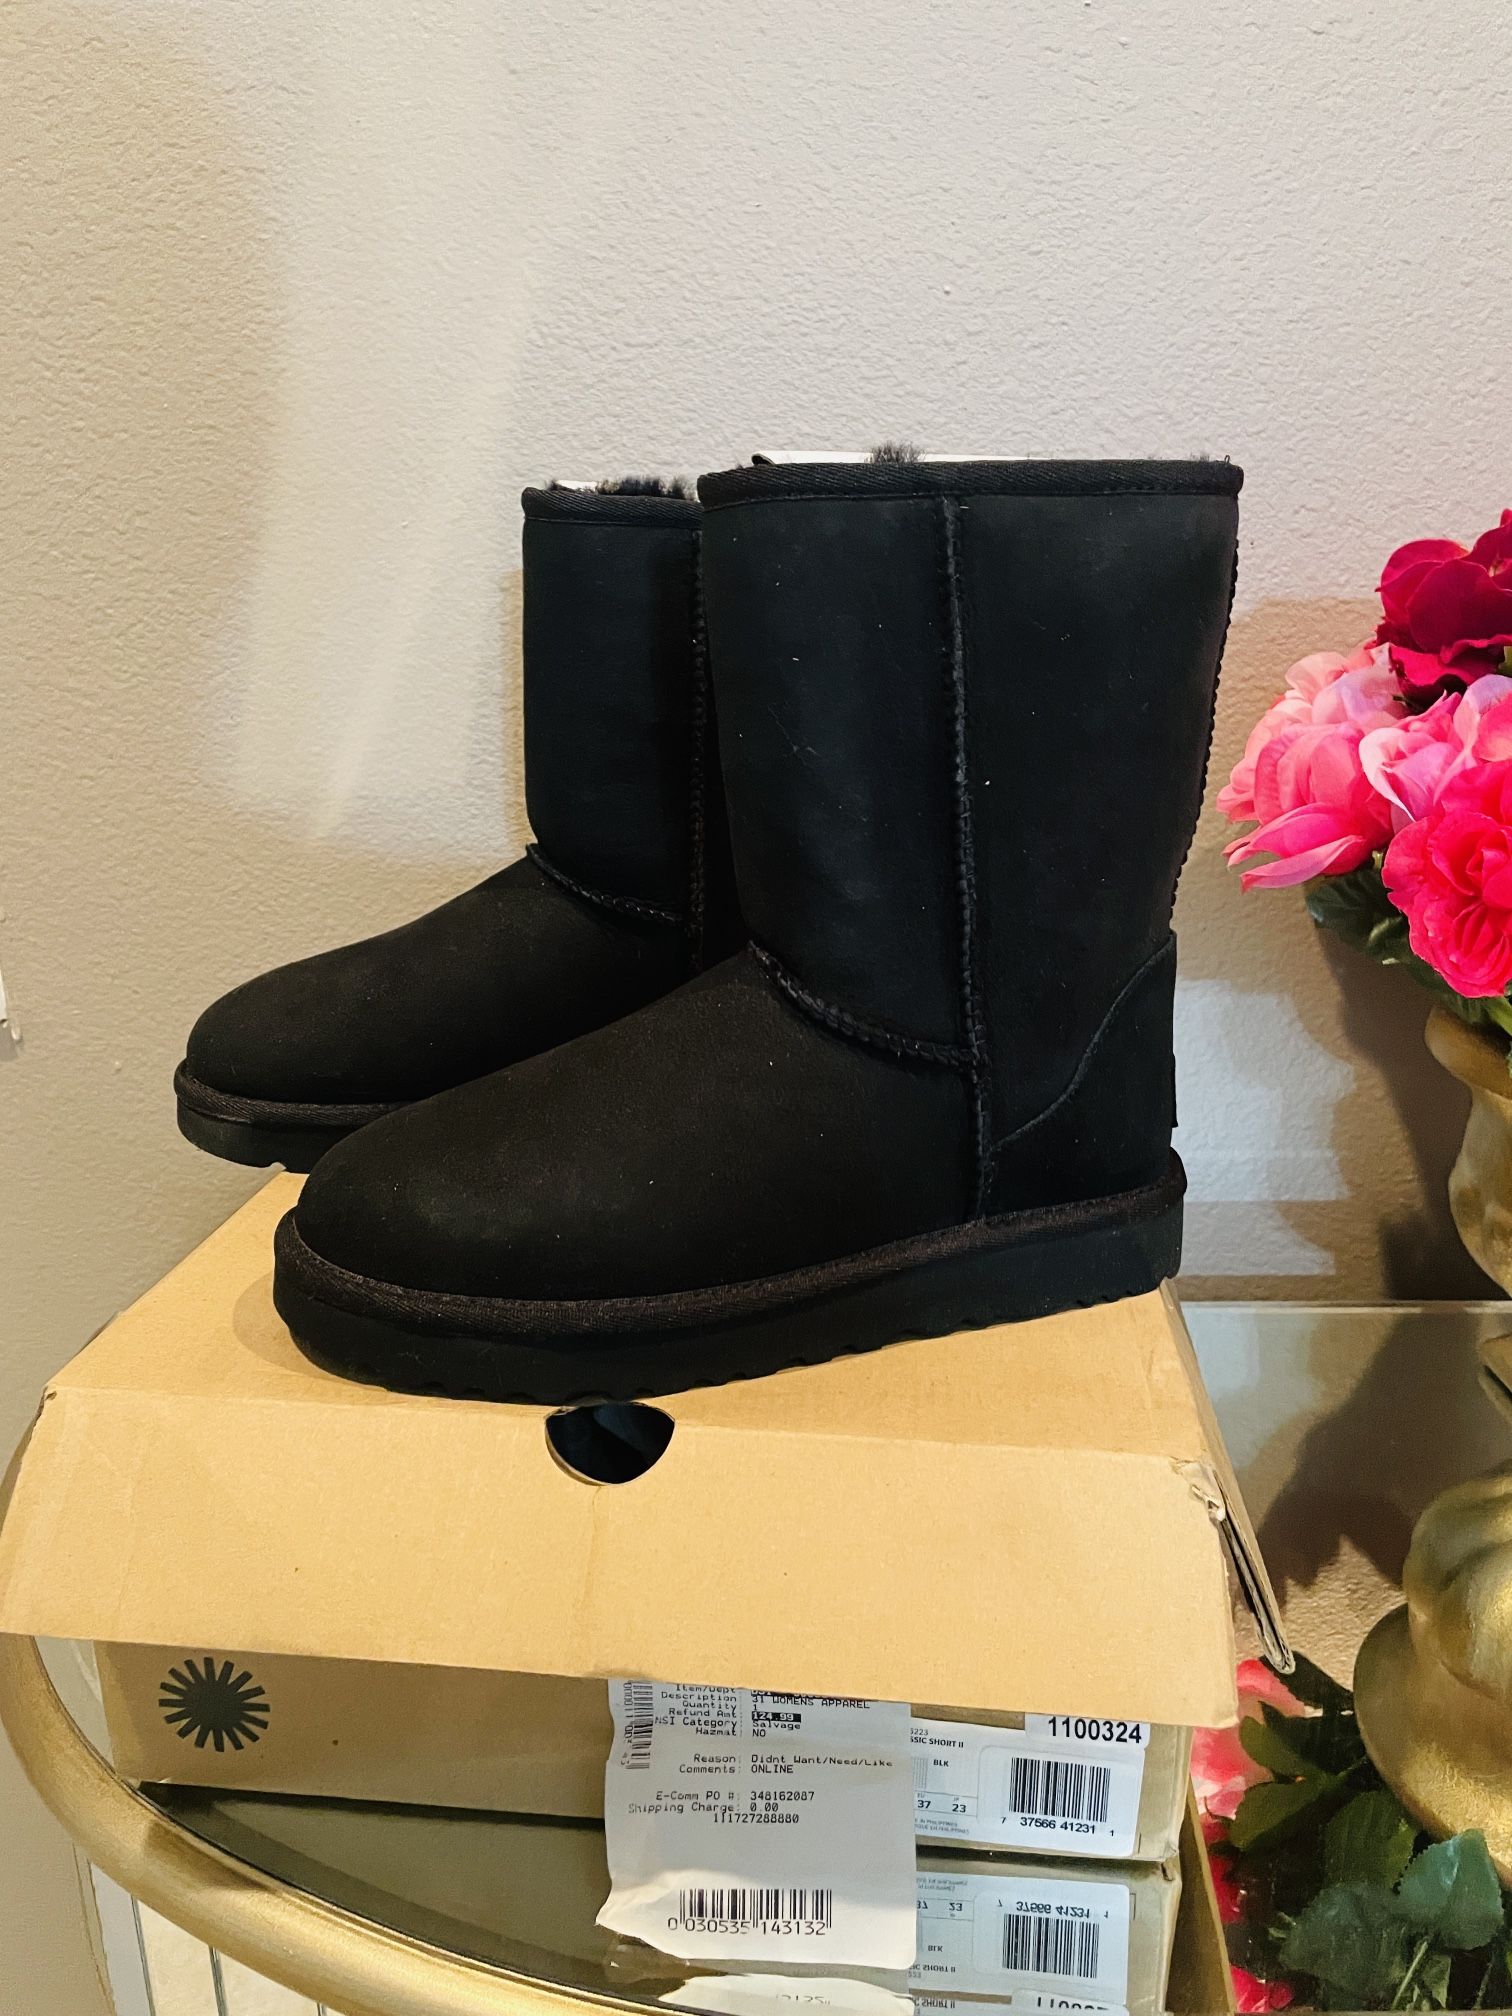 New. Authentic UGG boots